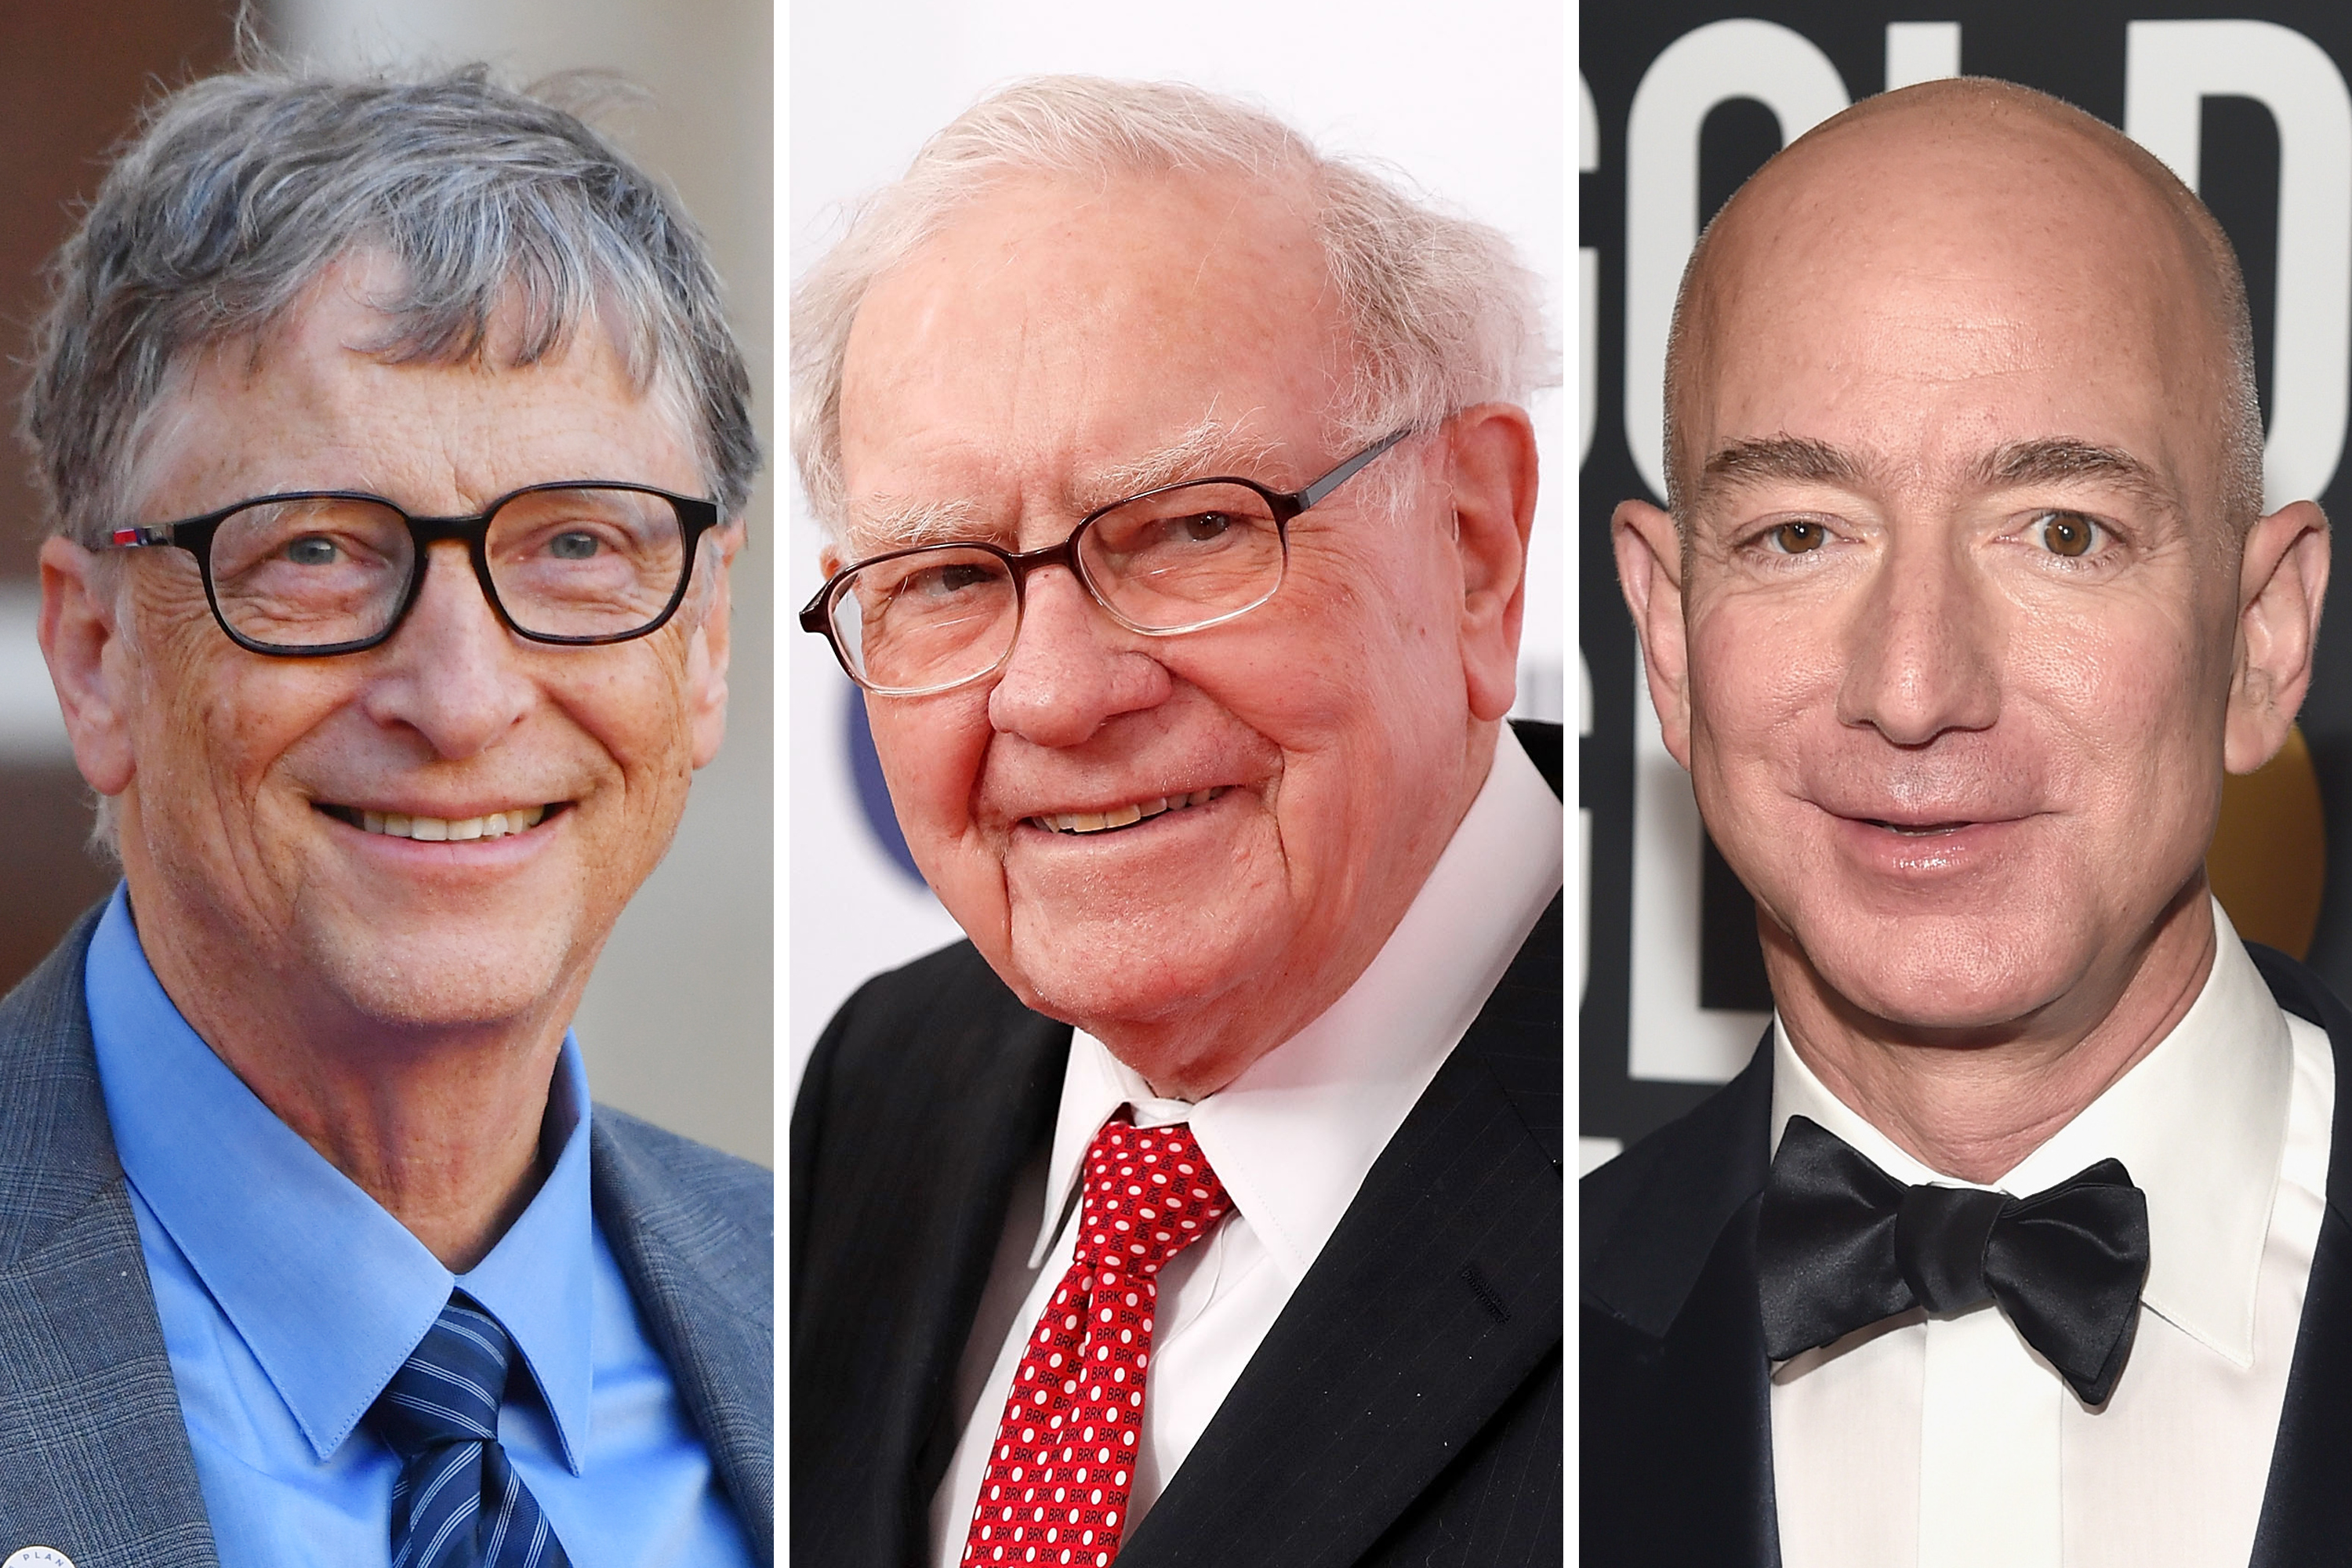 The 10 Richest People in America